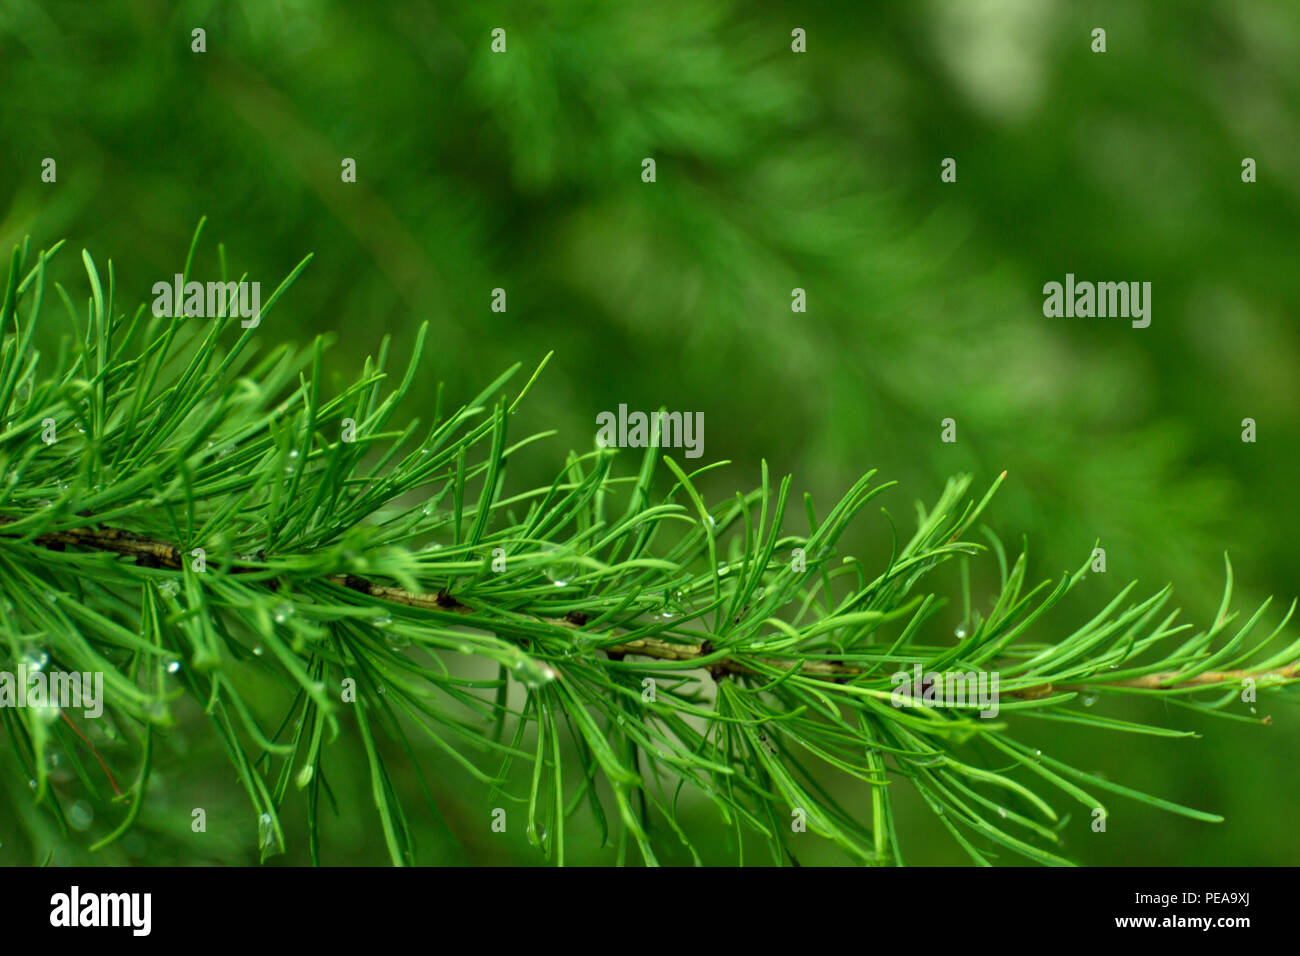 Green branches of larch on blur background. Stock Photo